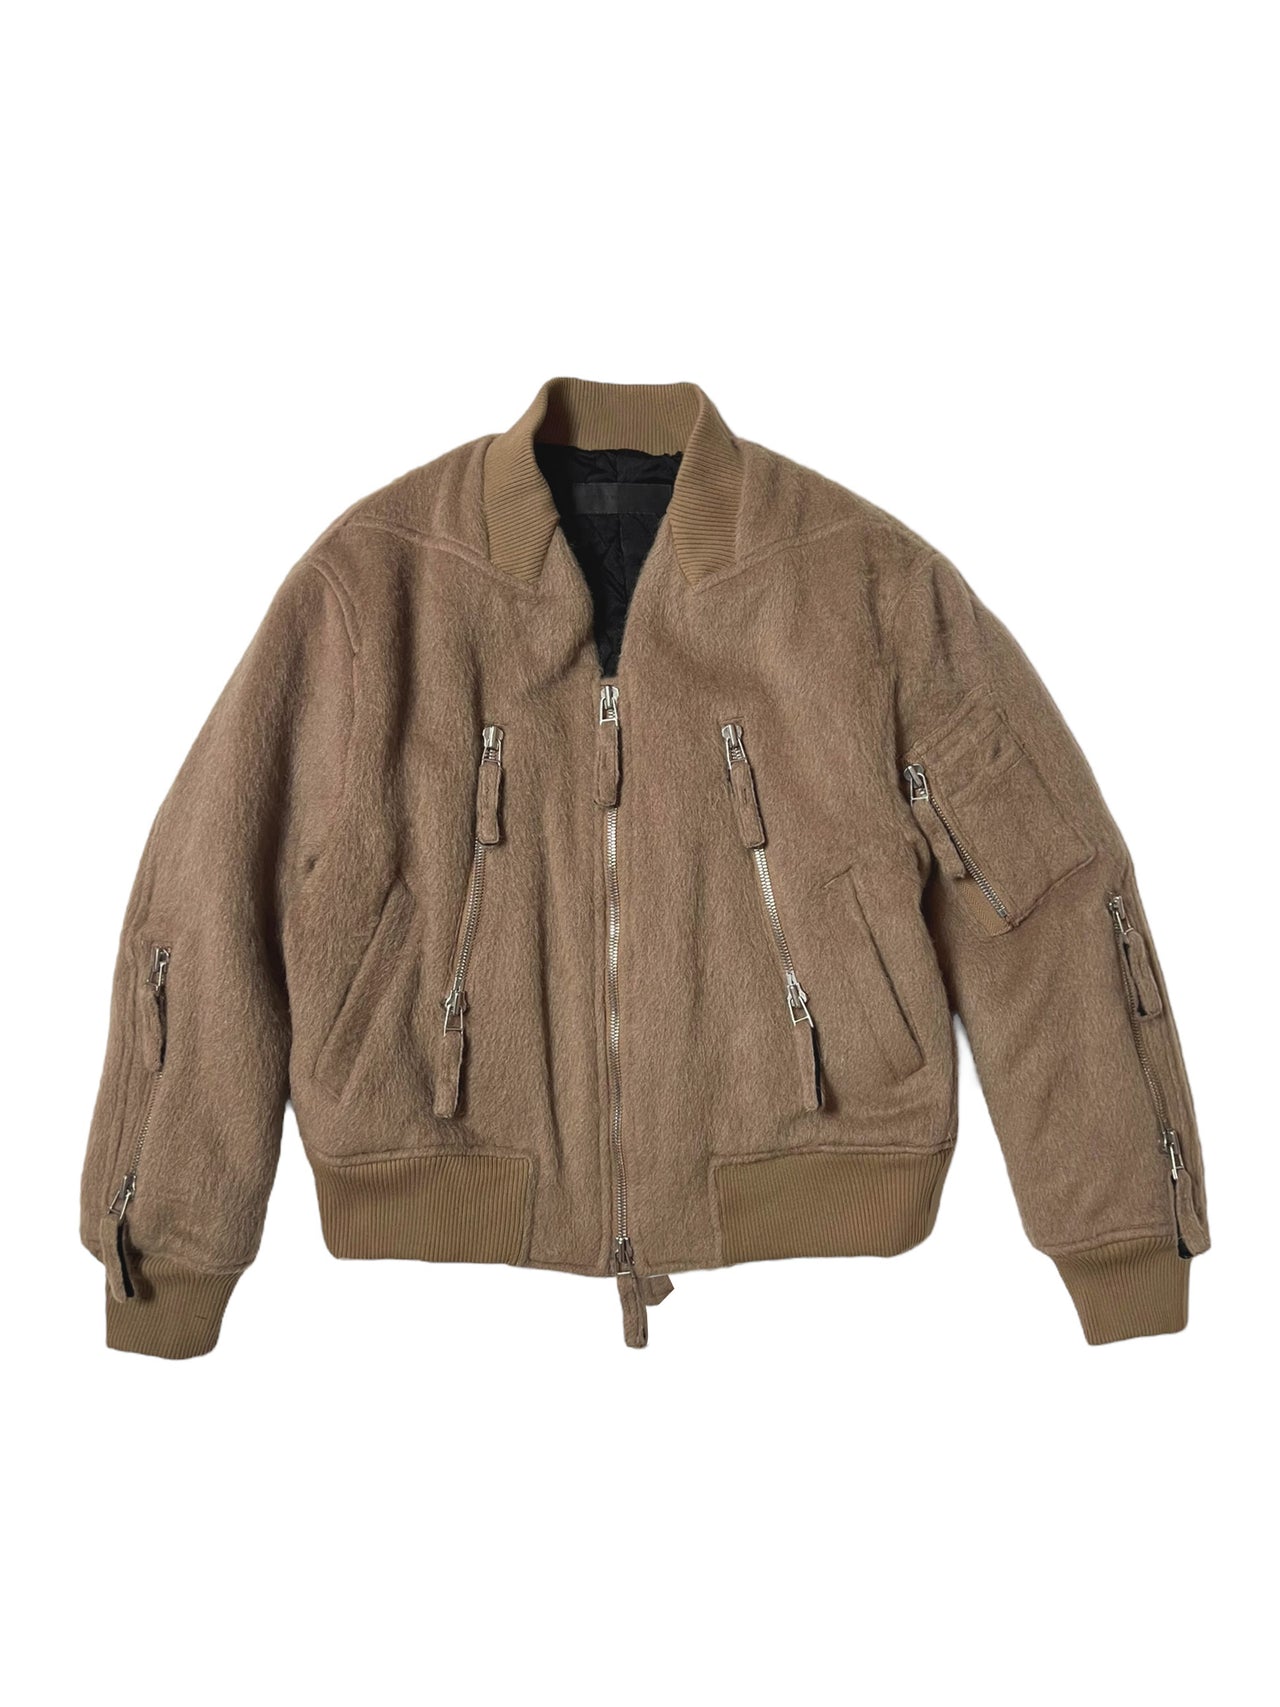 LUCAS / TAILORED COLLAR BOMBER in CAMEL - MOHAIR WOOL SHAGGY【PREORDER】